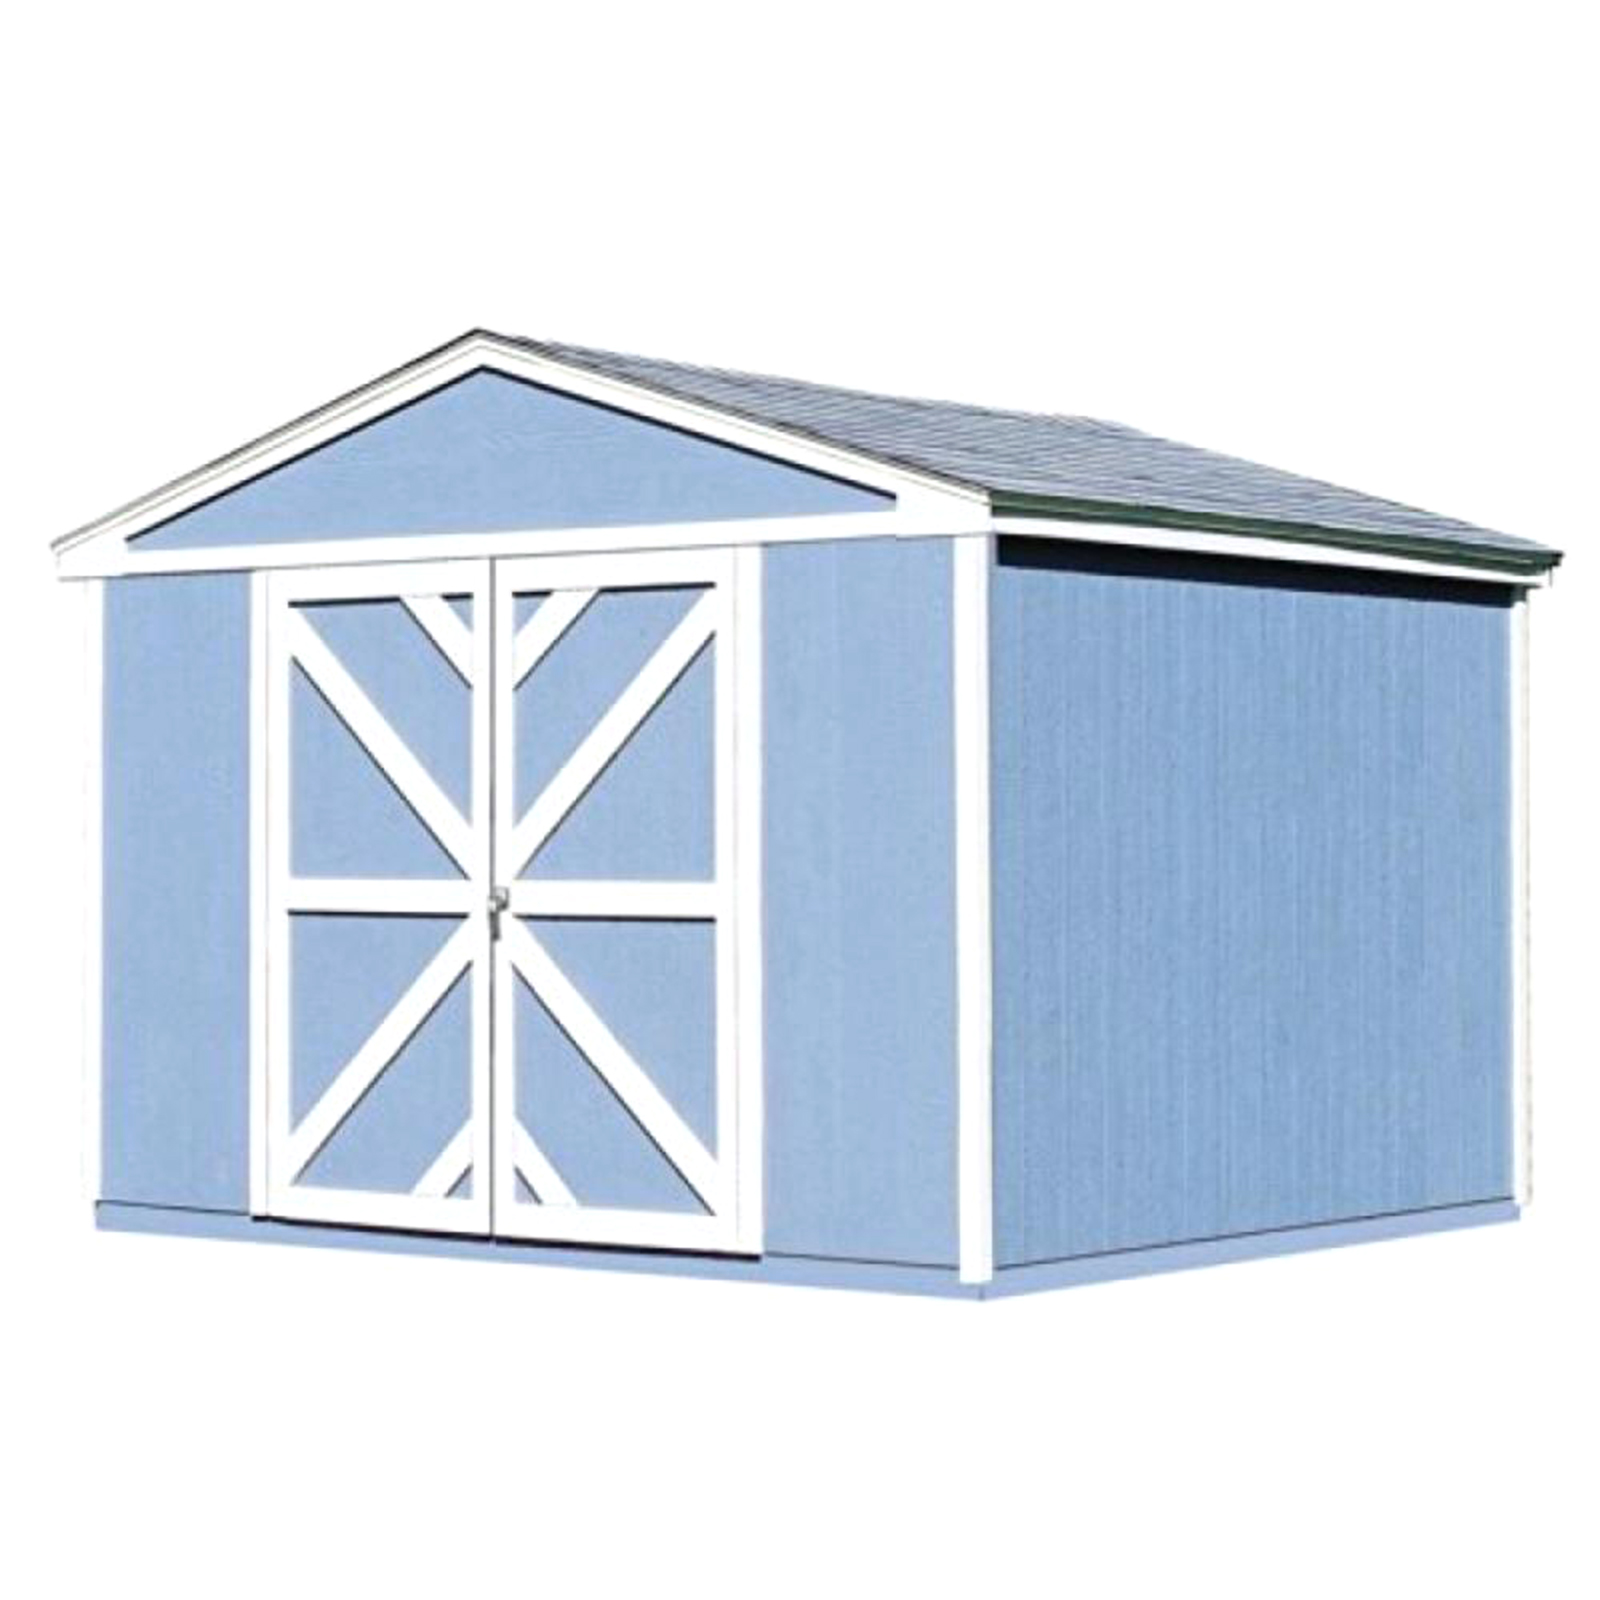 Handy Home Products 18413-0 Somerset 10' x 10' Wooden Storage Shed with Floor